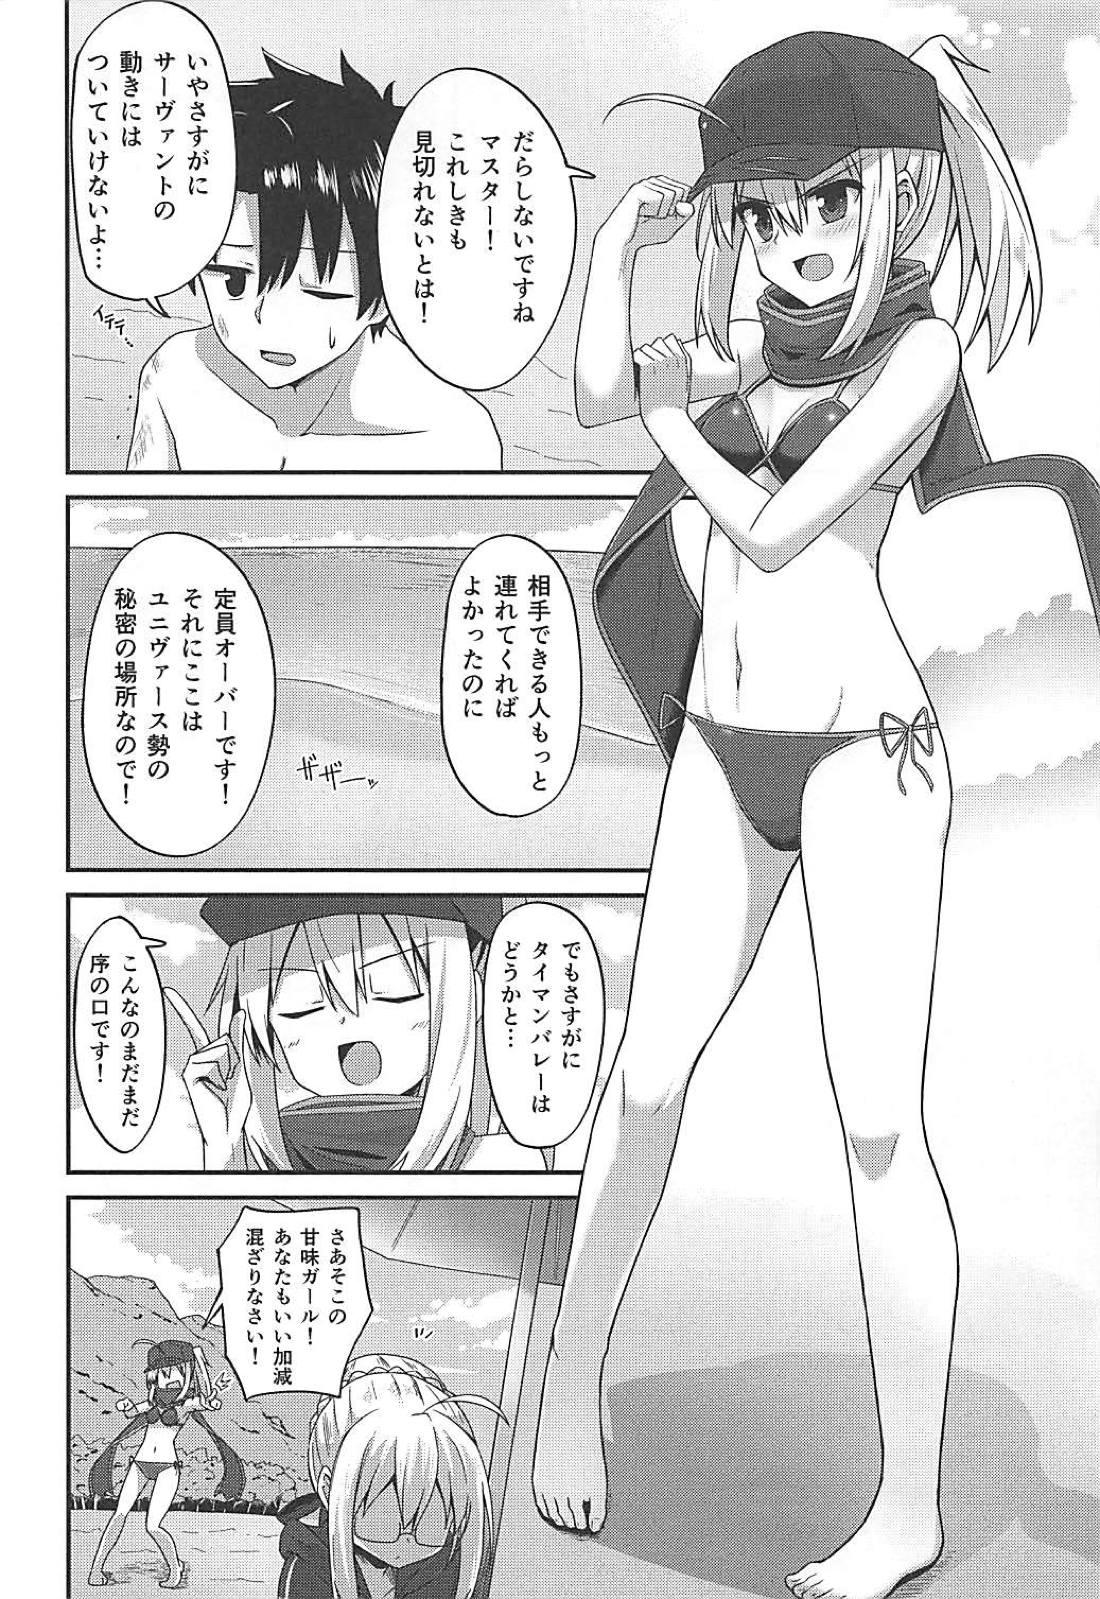 Clip Summer Heroines - Fate grand order Fishnet - Page 5